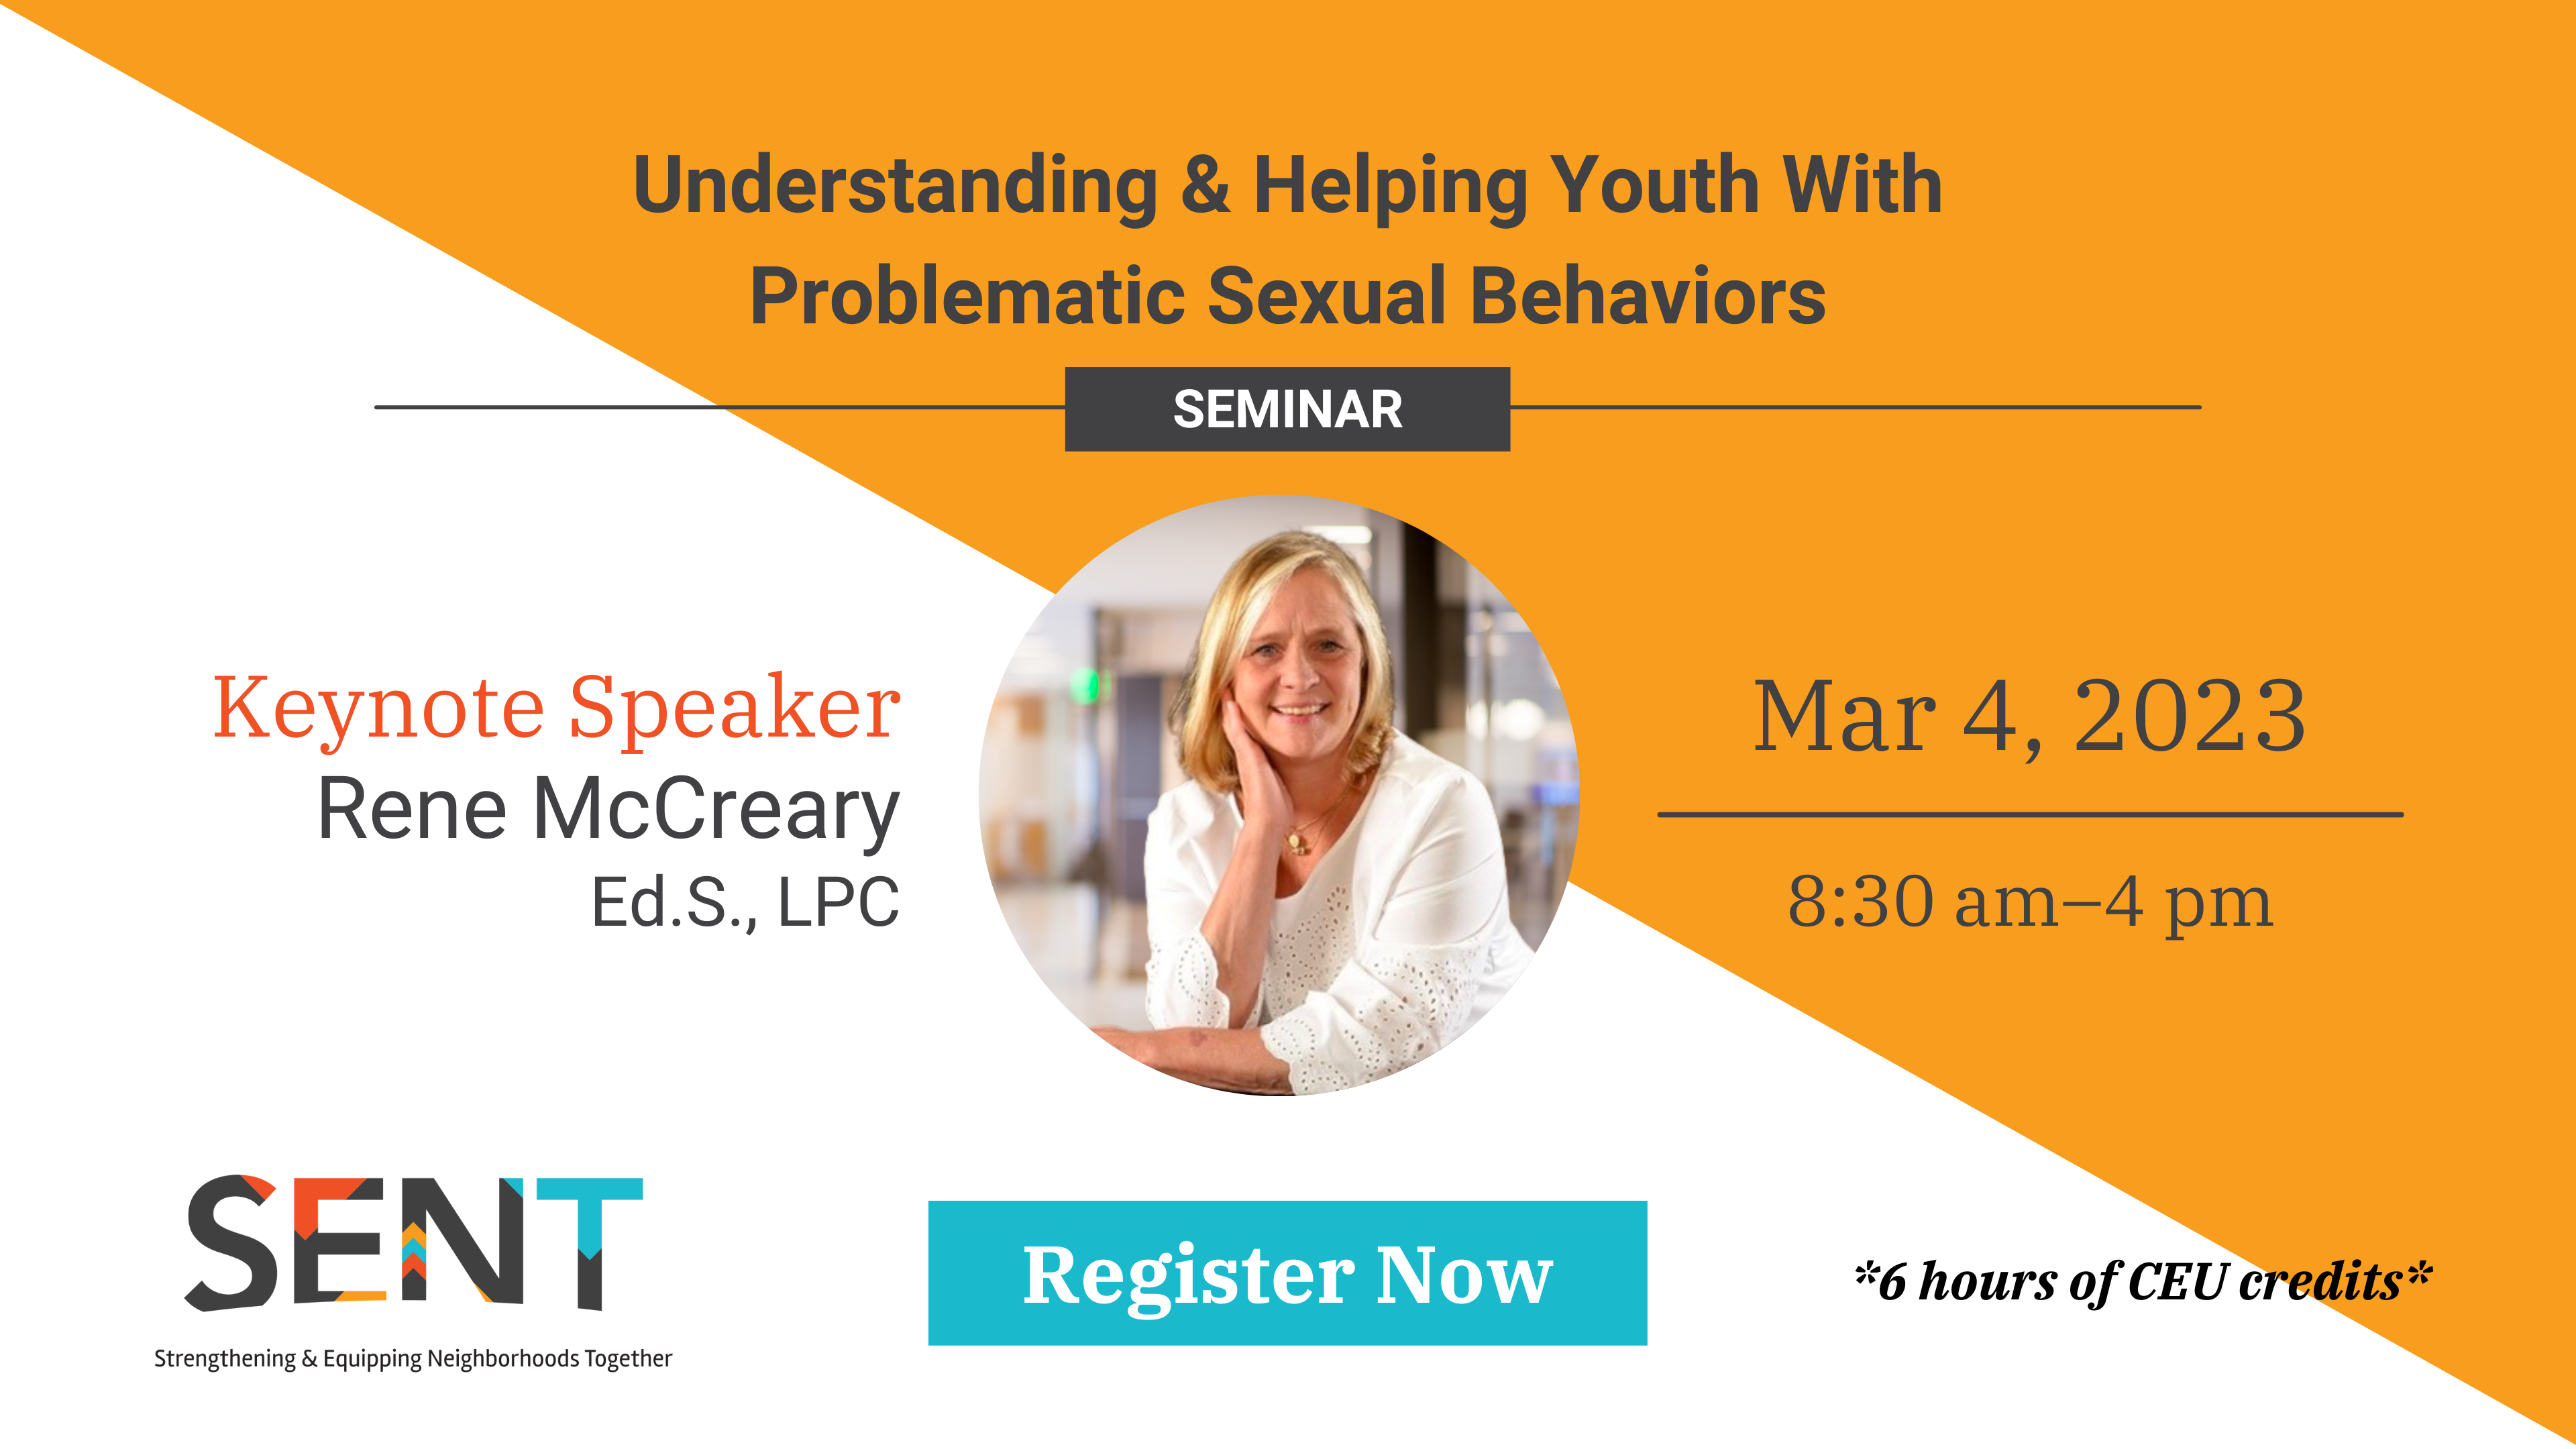 Understanding & Helping Youth With Problematic Sexual Behaviors